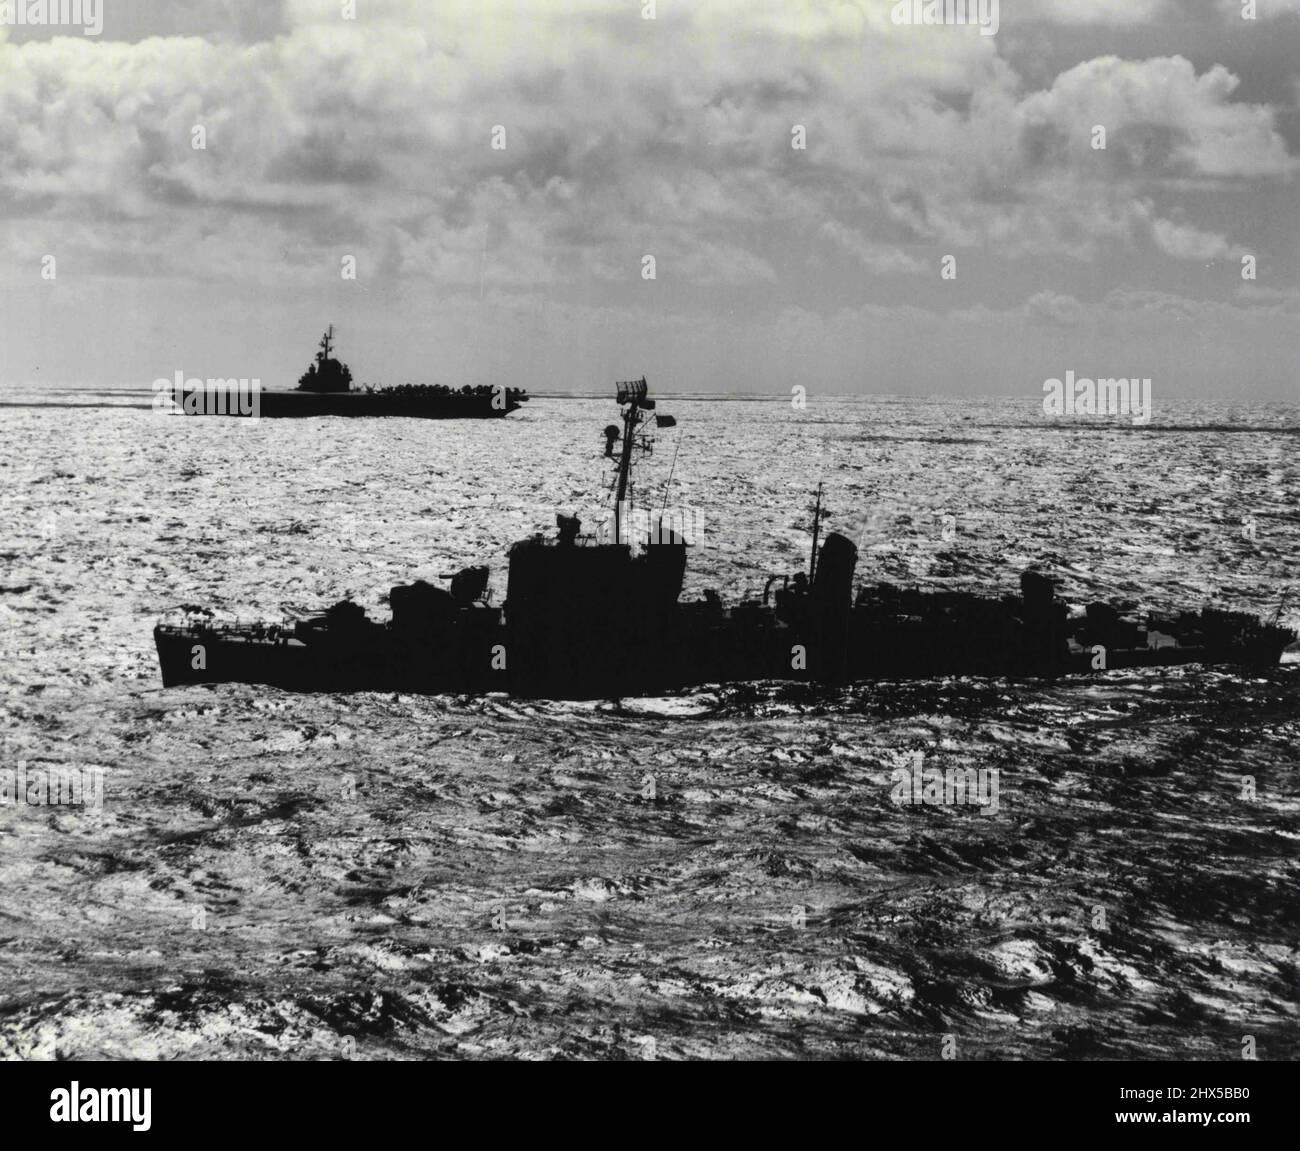 Japan Sea Silhouette - The destroyer USS Carpenter escorts the carrier USS Essex, flagship of East Carrier Task Force 77 as they steam through Korean Coastal waters to strike at Communist targets in North Korea. September 18, 1951. (Photo by Official U.S. Navy Photograph) Stock Photo